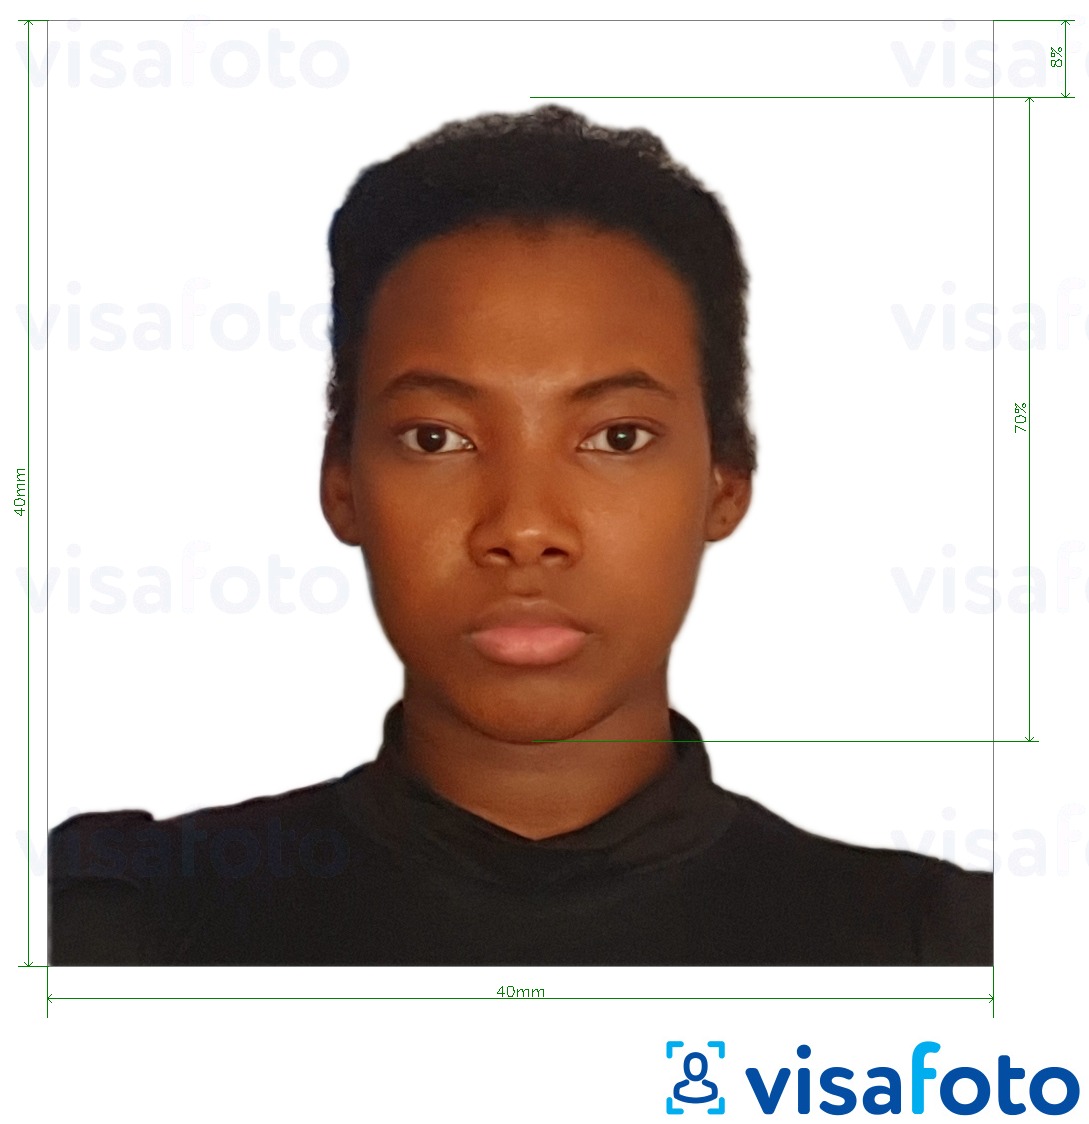 Example of photo for Madagascar passport 40x40 mm with exact size specification